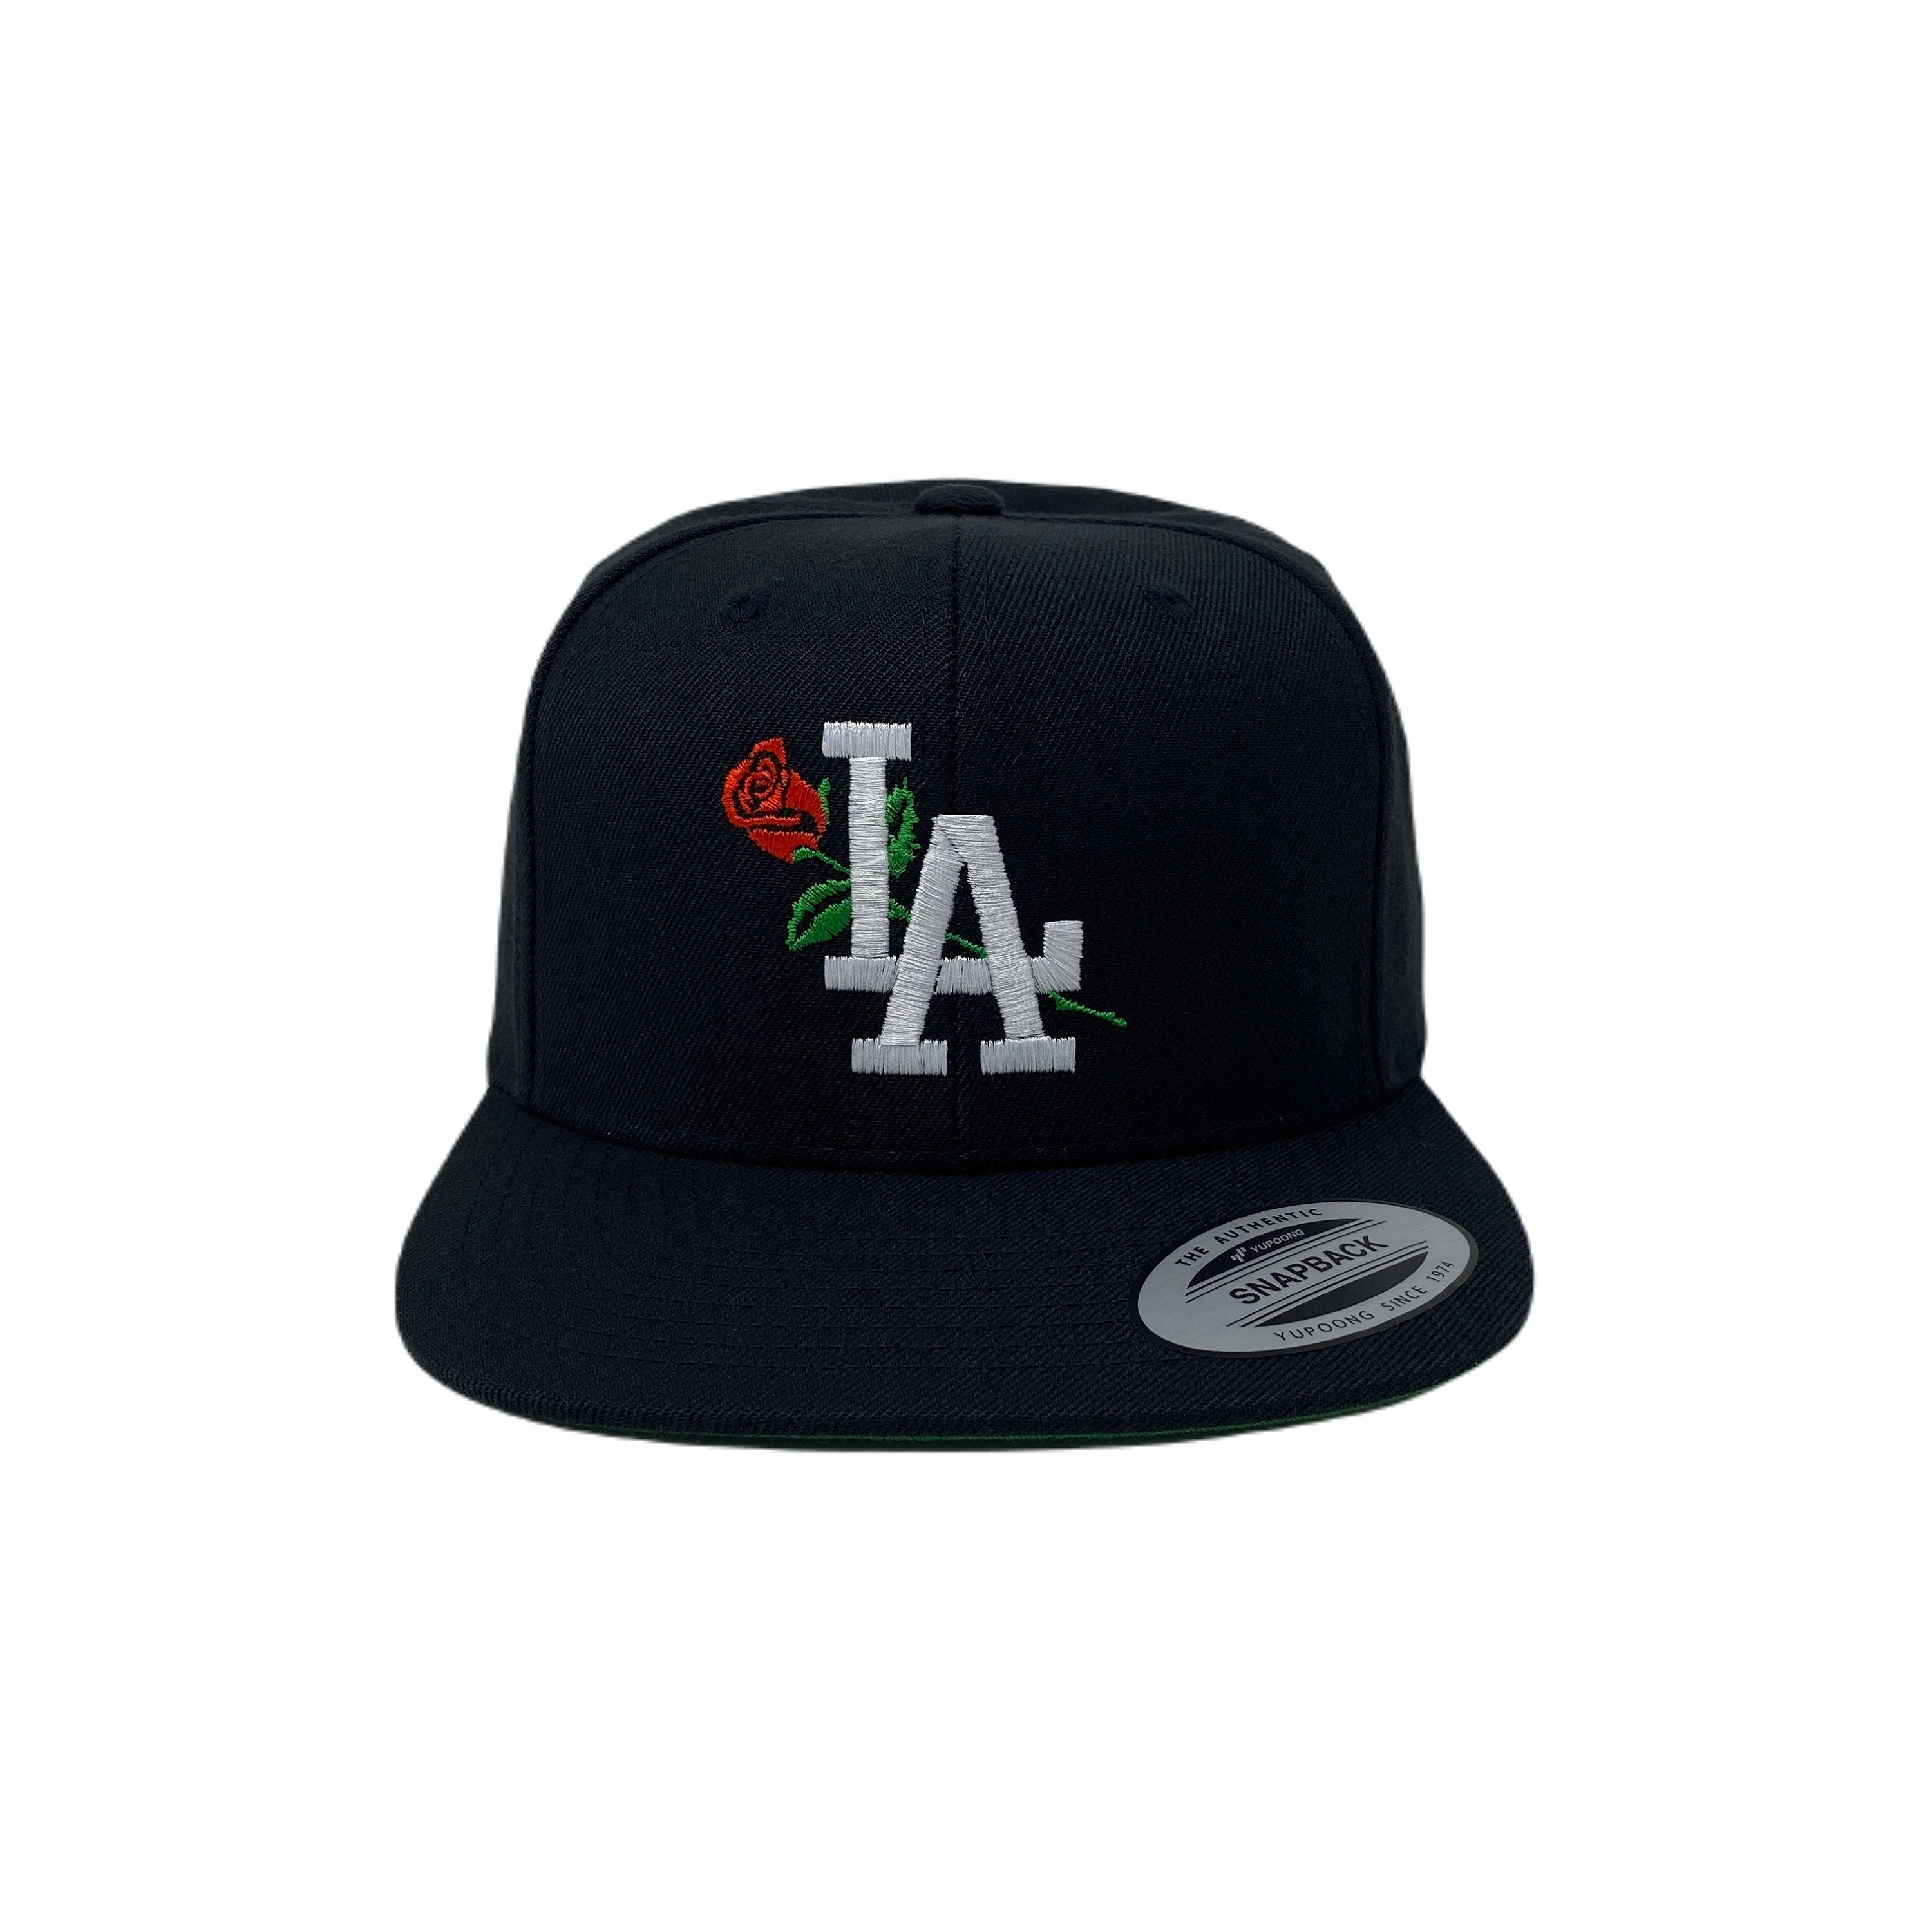 la hat with roses